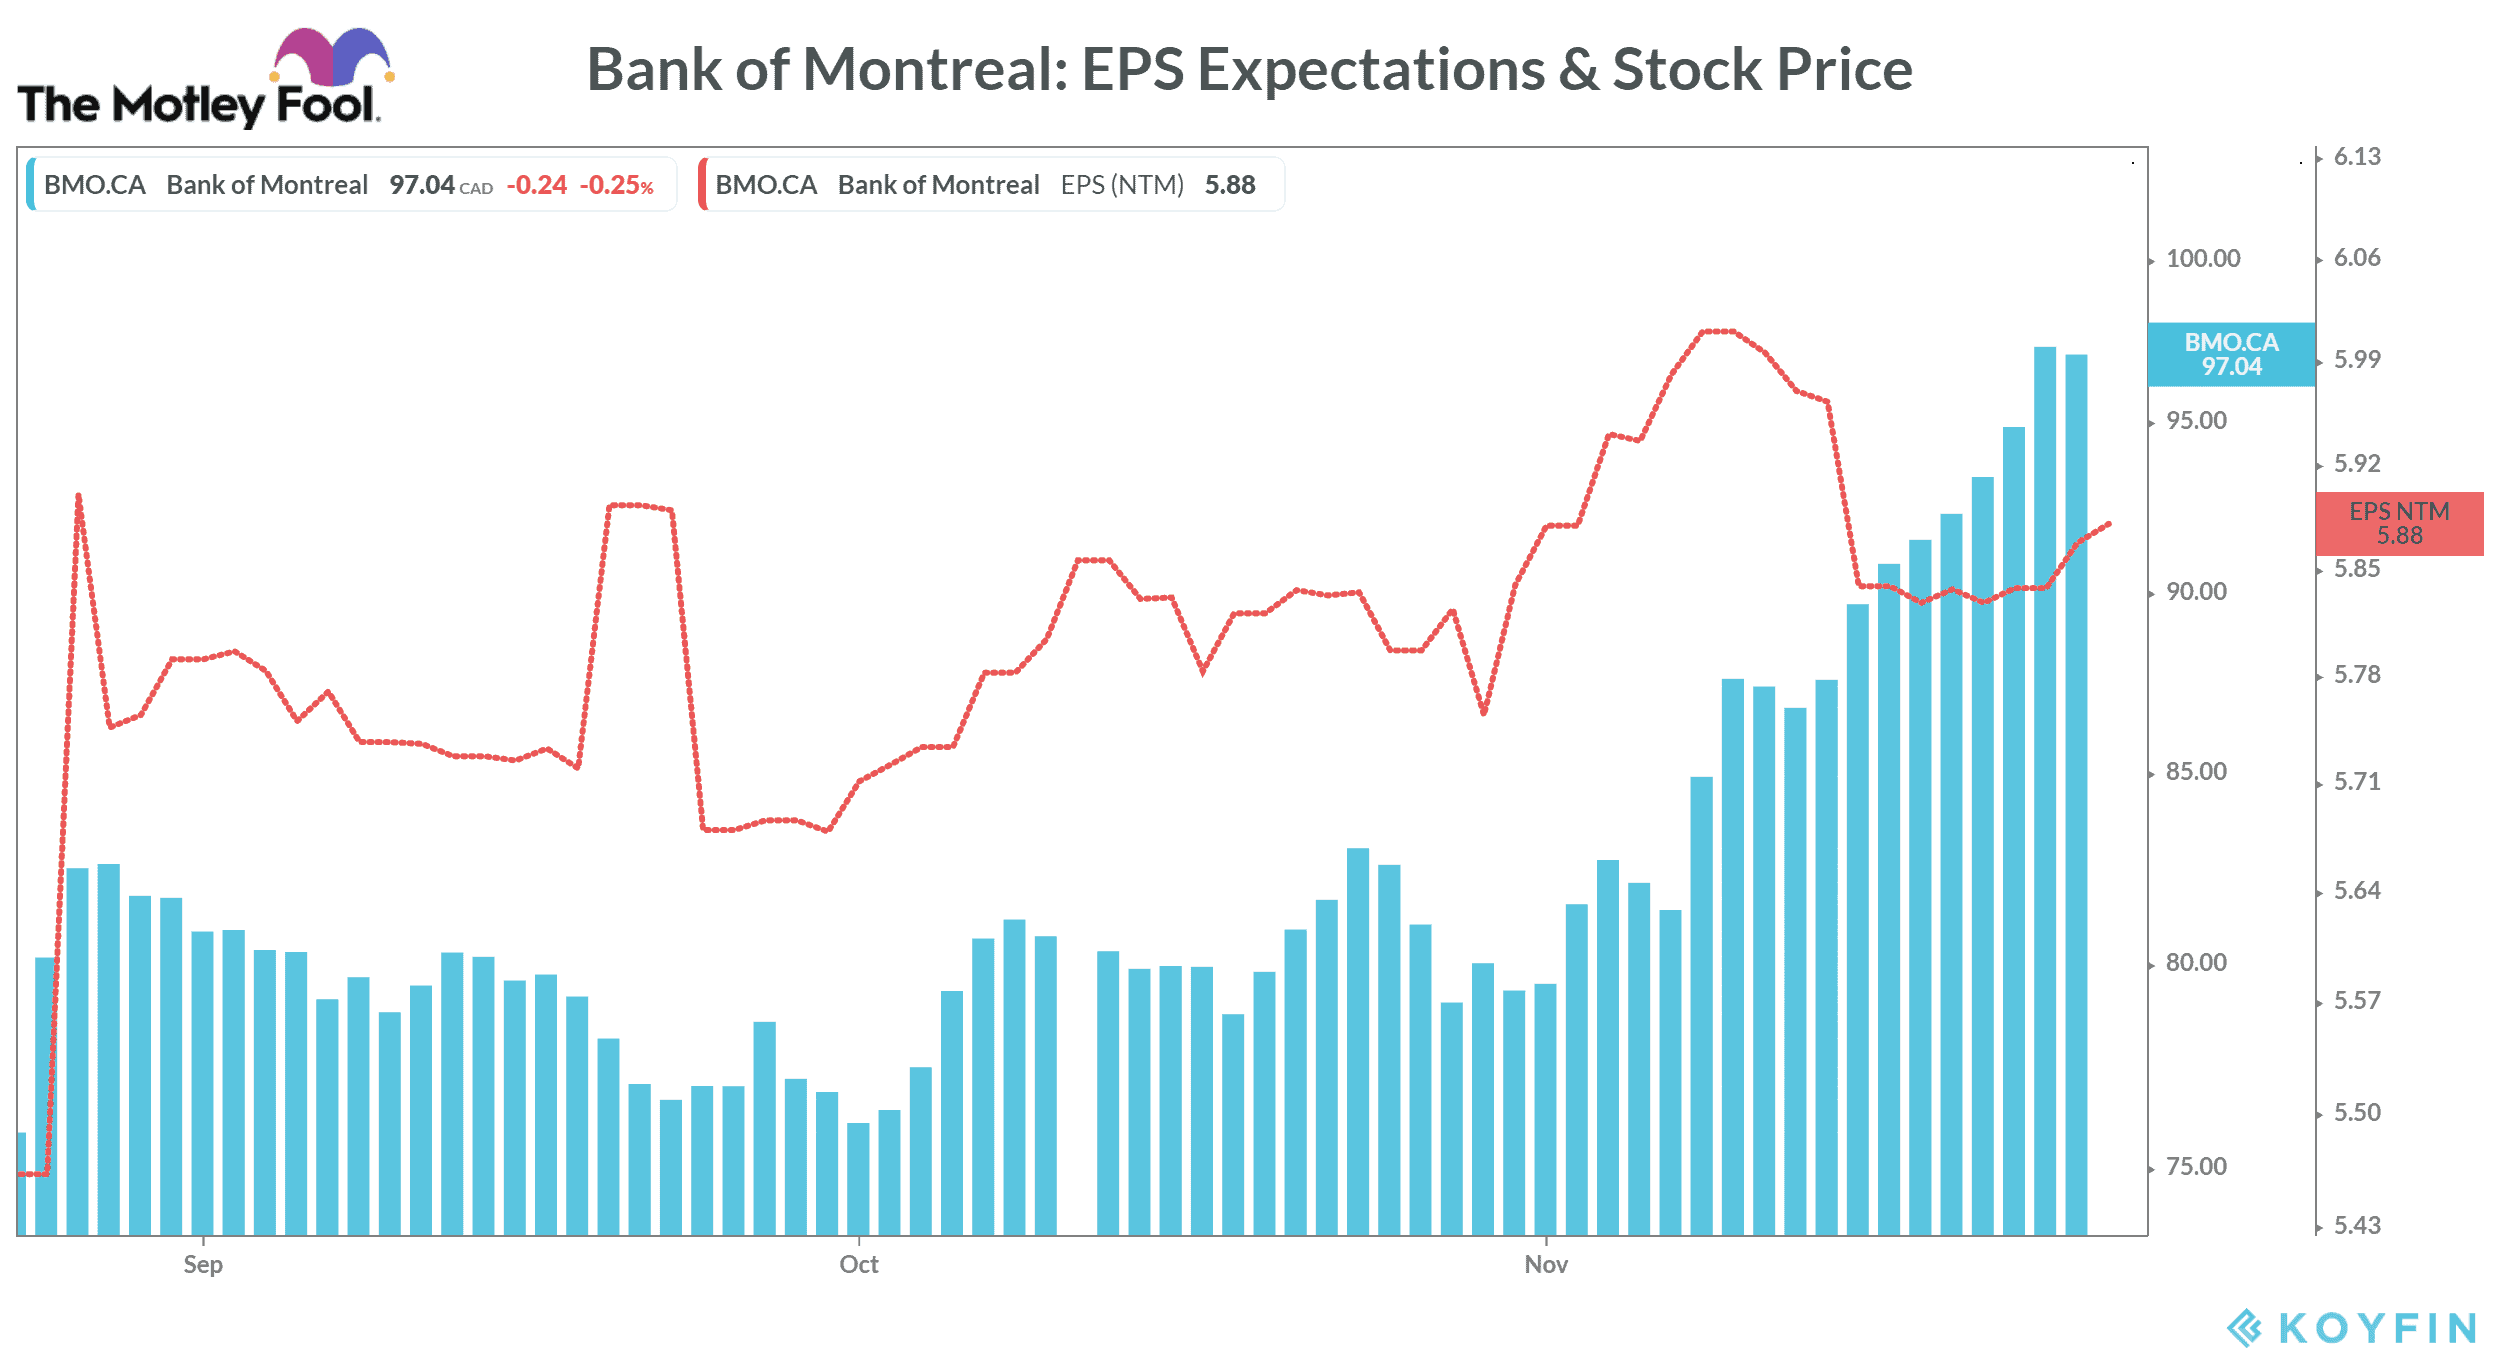 Bank of Montreal EPS Expectations & Stock Price